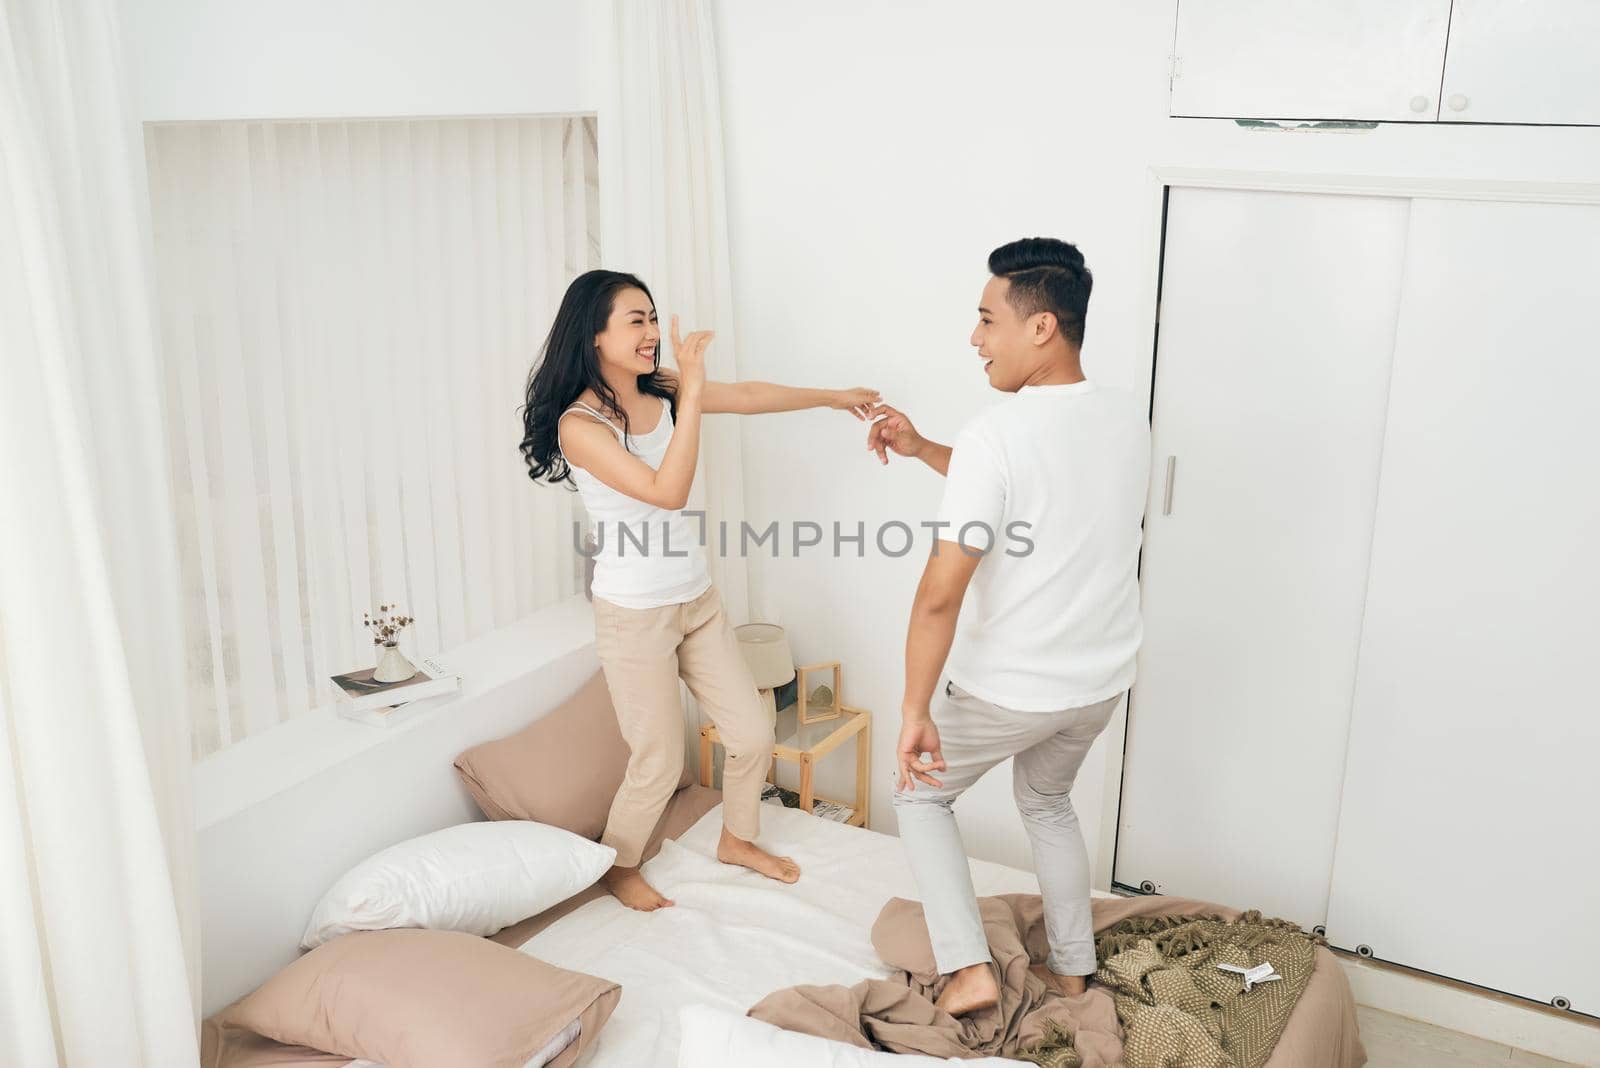 Dancing on the bed. Full length of beautiful young couple holding hands and smiling while dancing on the bed at home by makidotvn